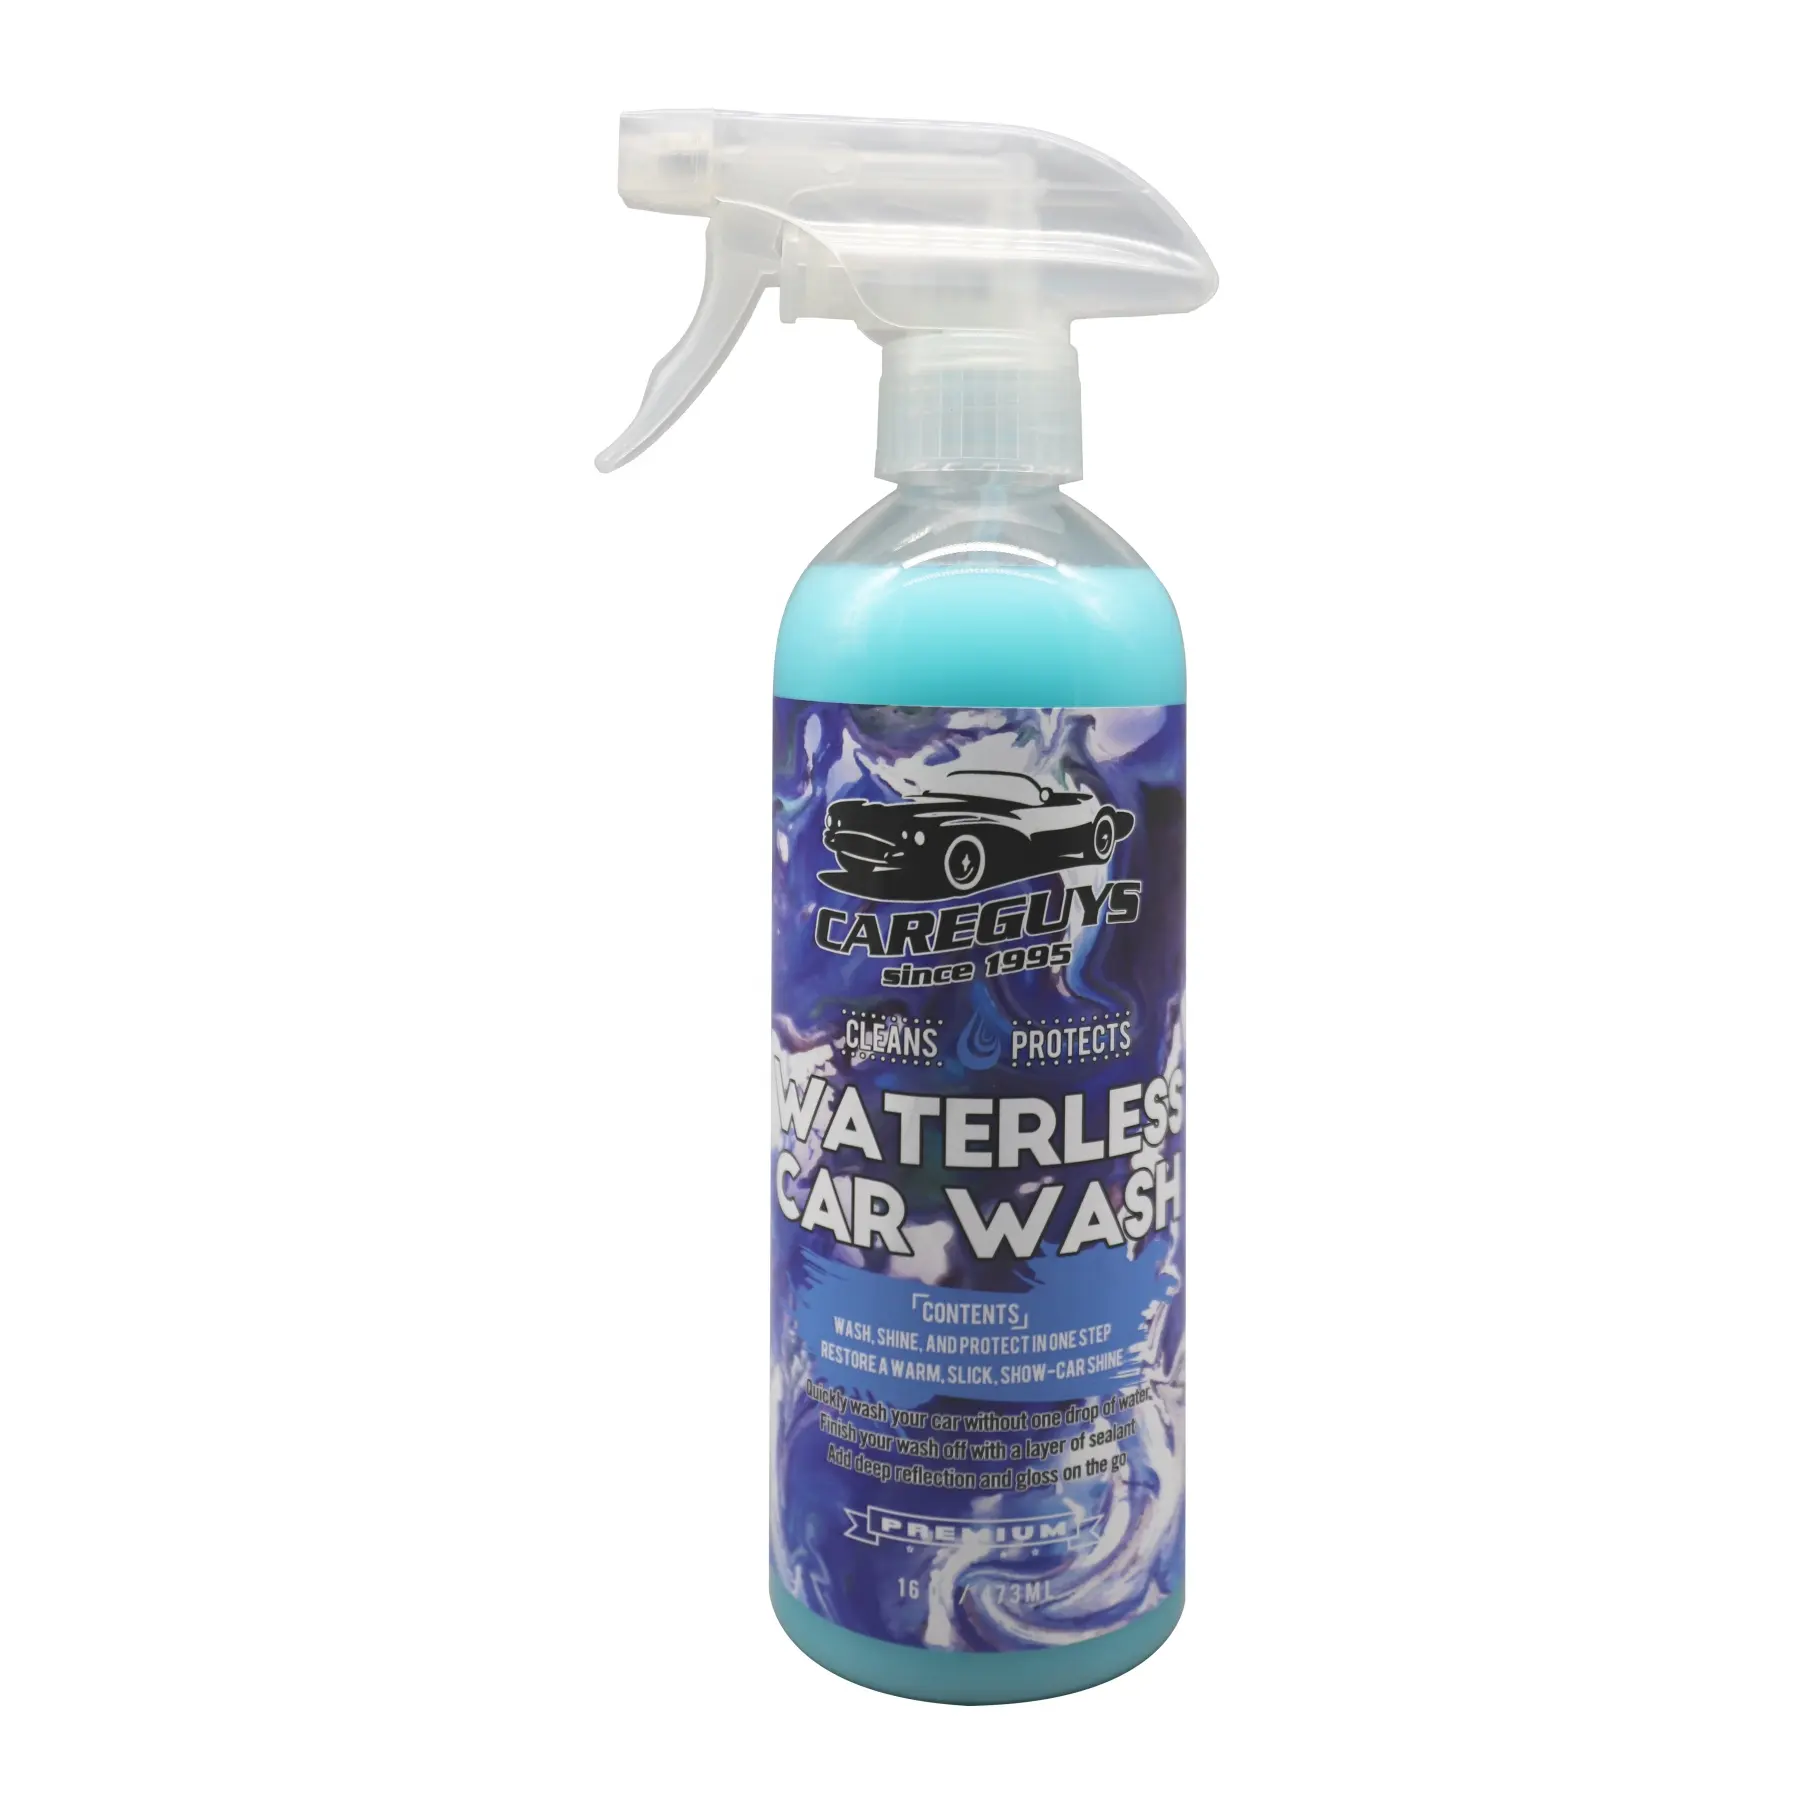 waterless car wash, This cleaner will give your amazing results on any exterior panel you want to clean on your vehicle